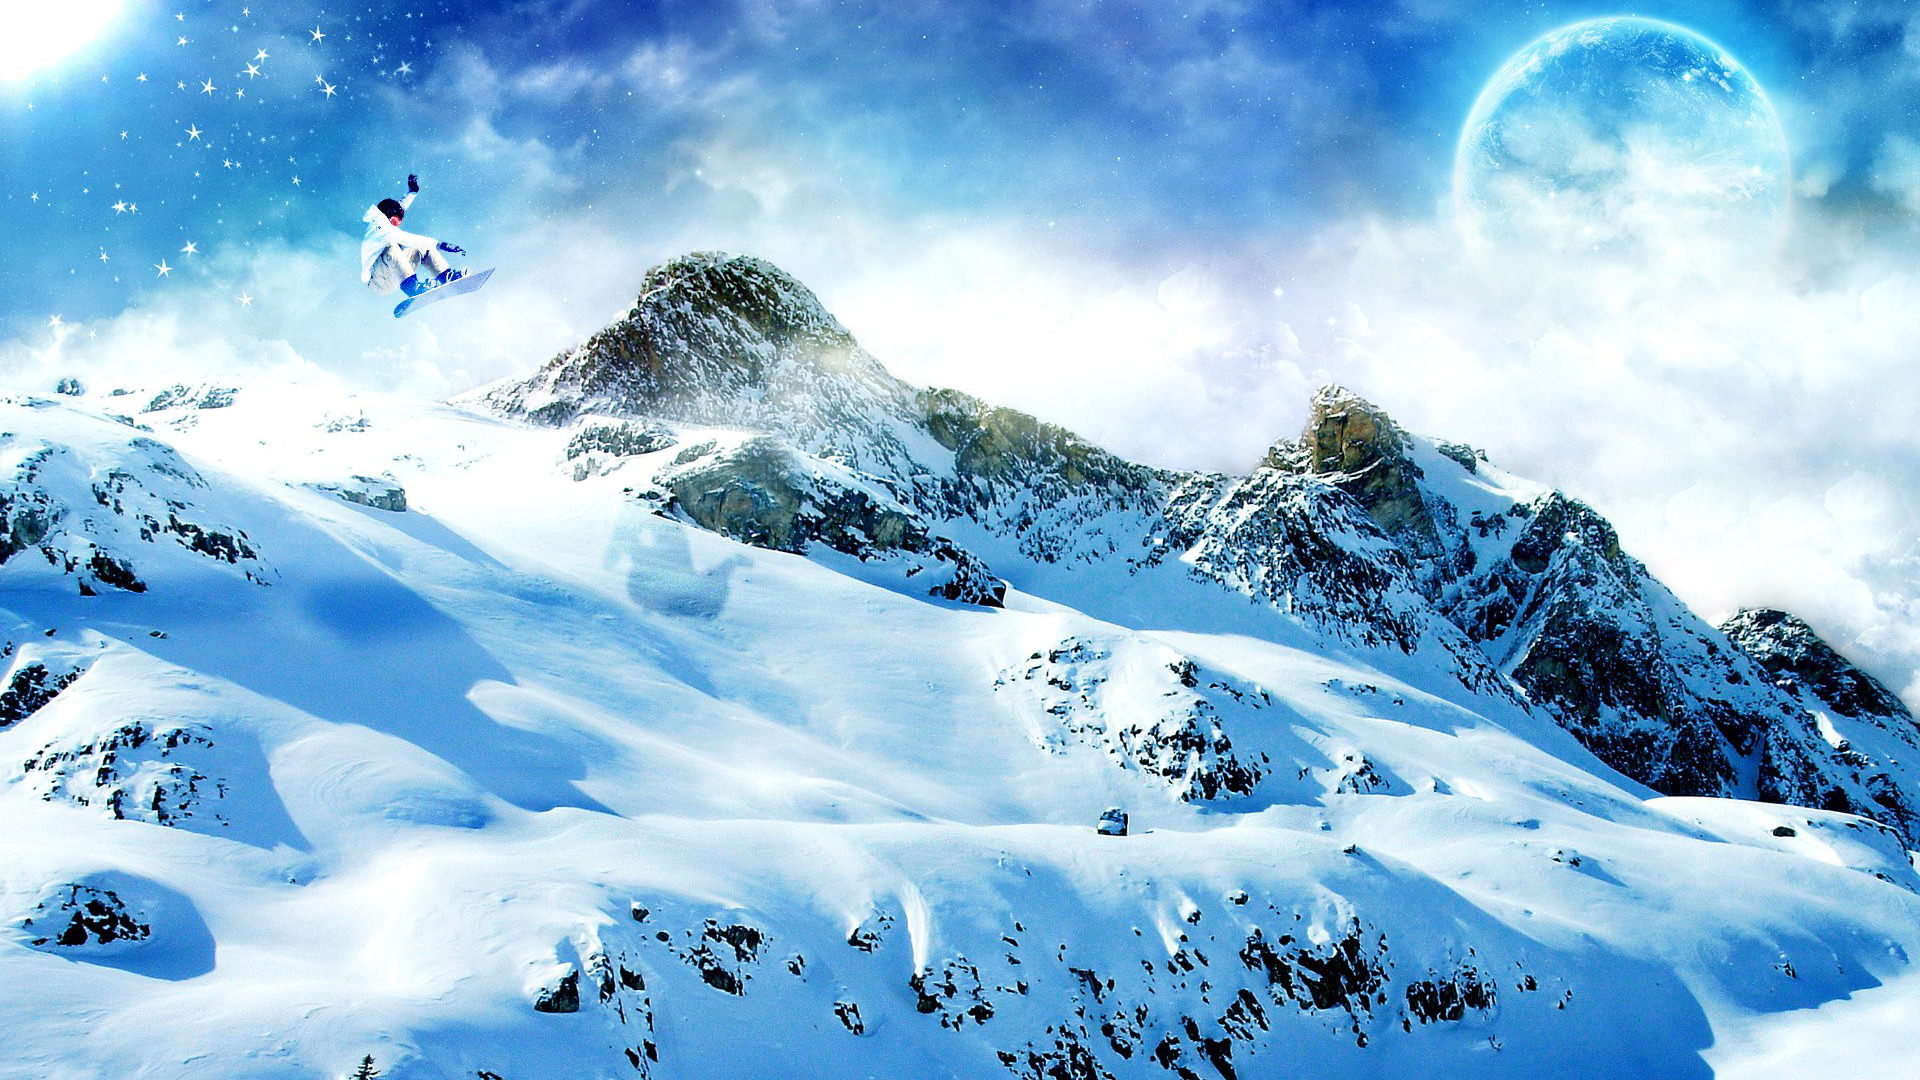 Pla Over Snowy Mountains Wallpaper